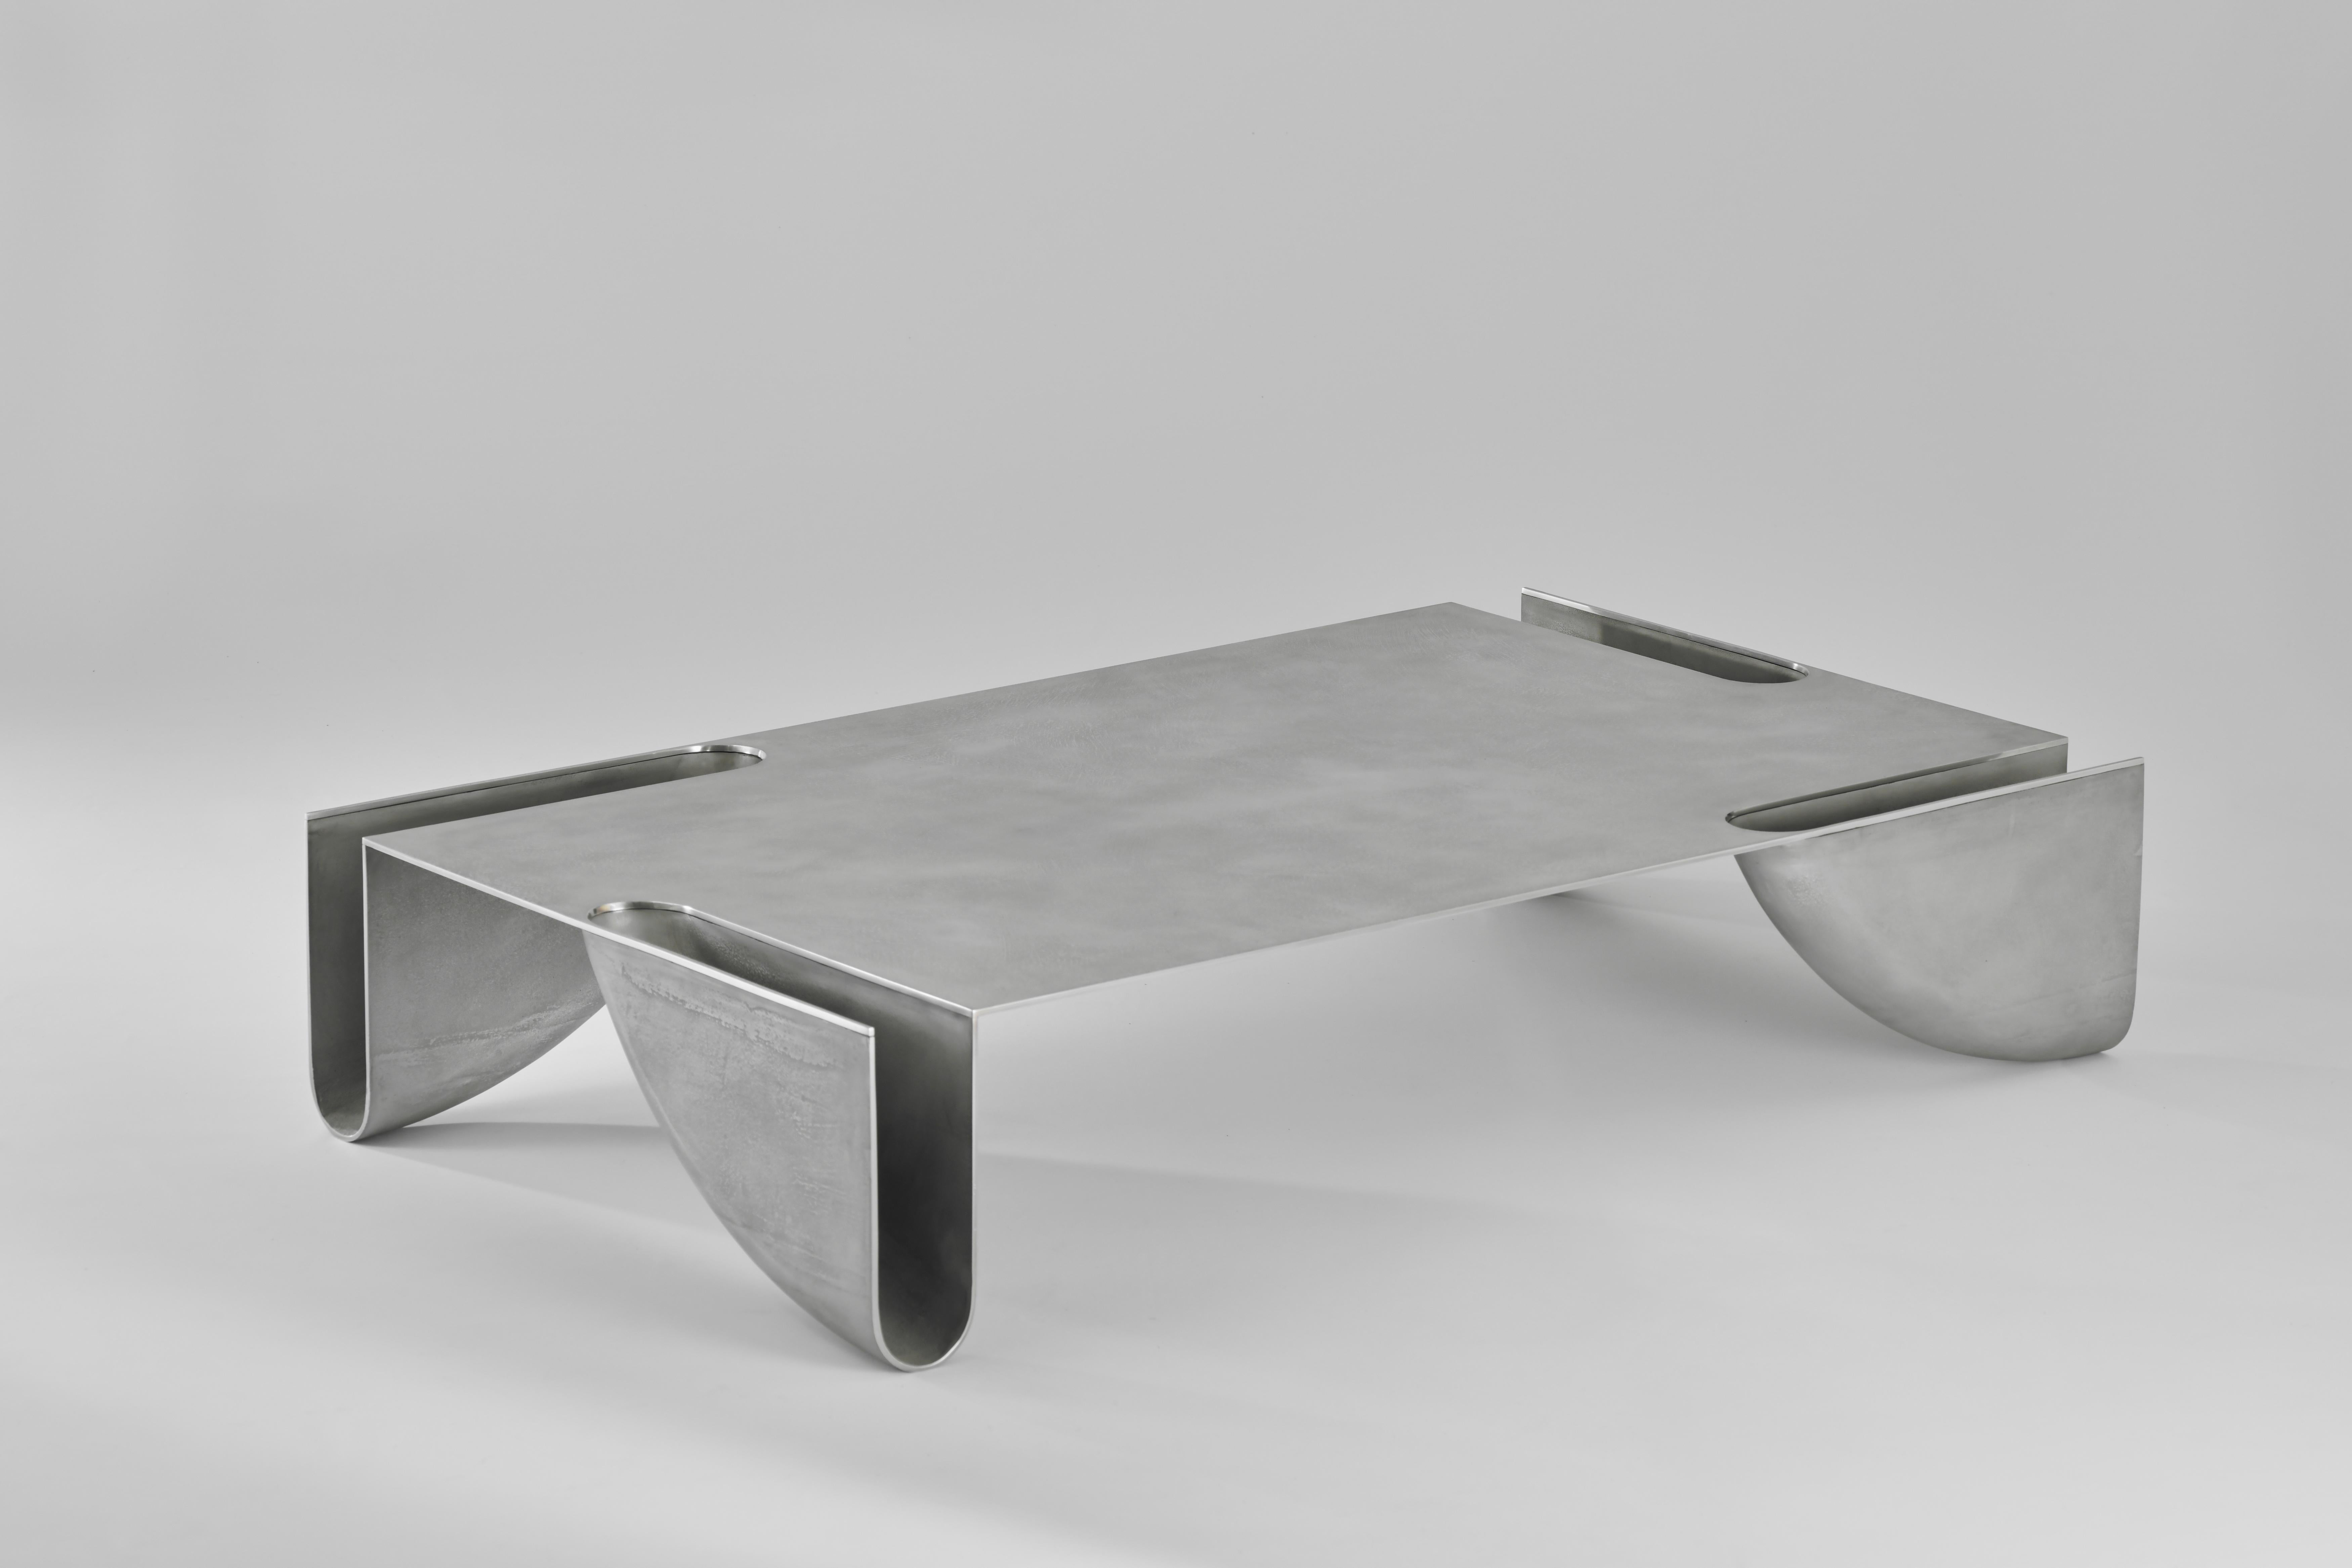 The “bb” table is part of Corpus Studio’s sculptural bb collection. The collection seeks to explore the limits between minimal and maximal, brutalism and elegance, sensual and humorous.

The sculptural design comes from the convergence of tectonic